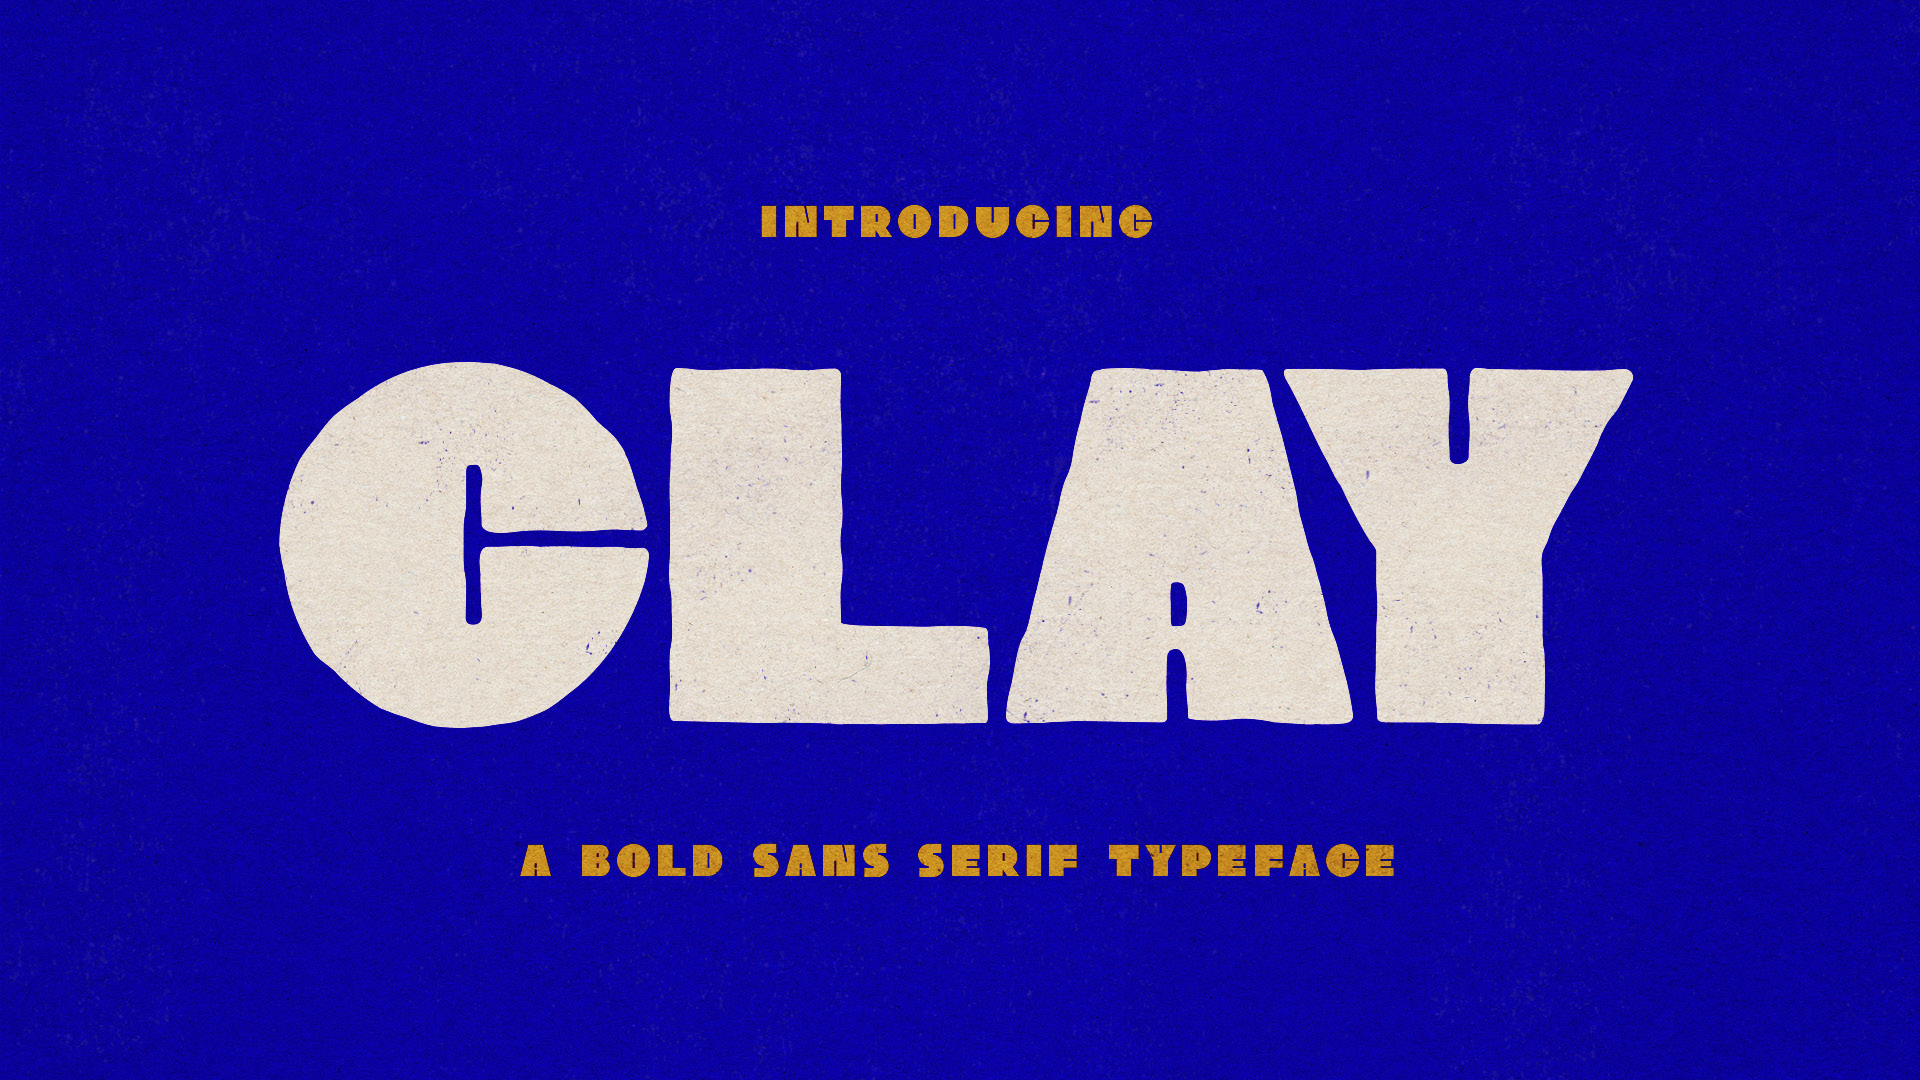 featured image:Clay: A Bold Sans Serif Typeface